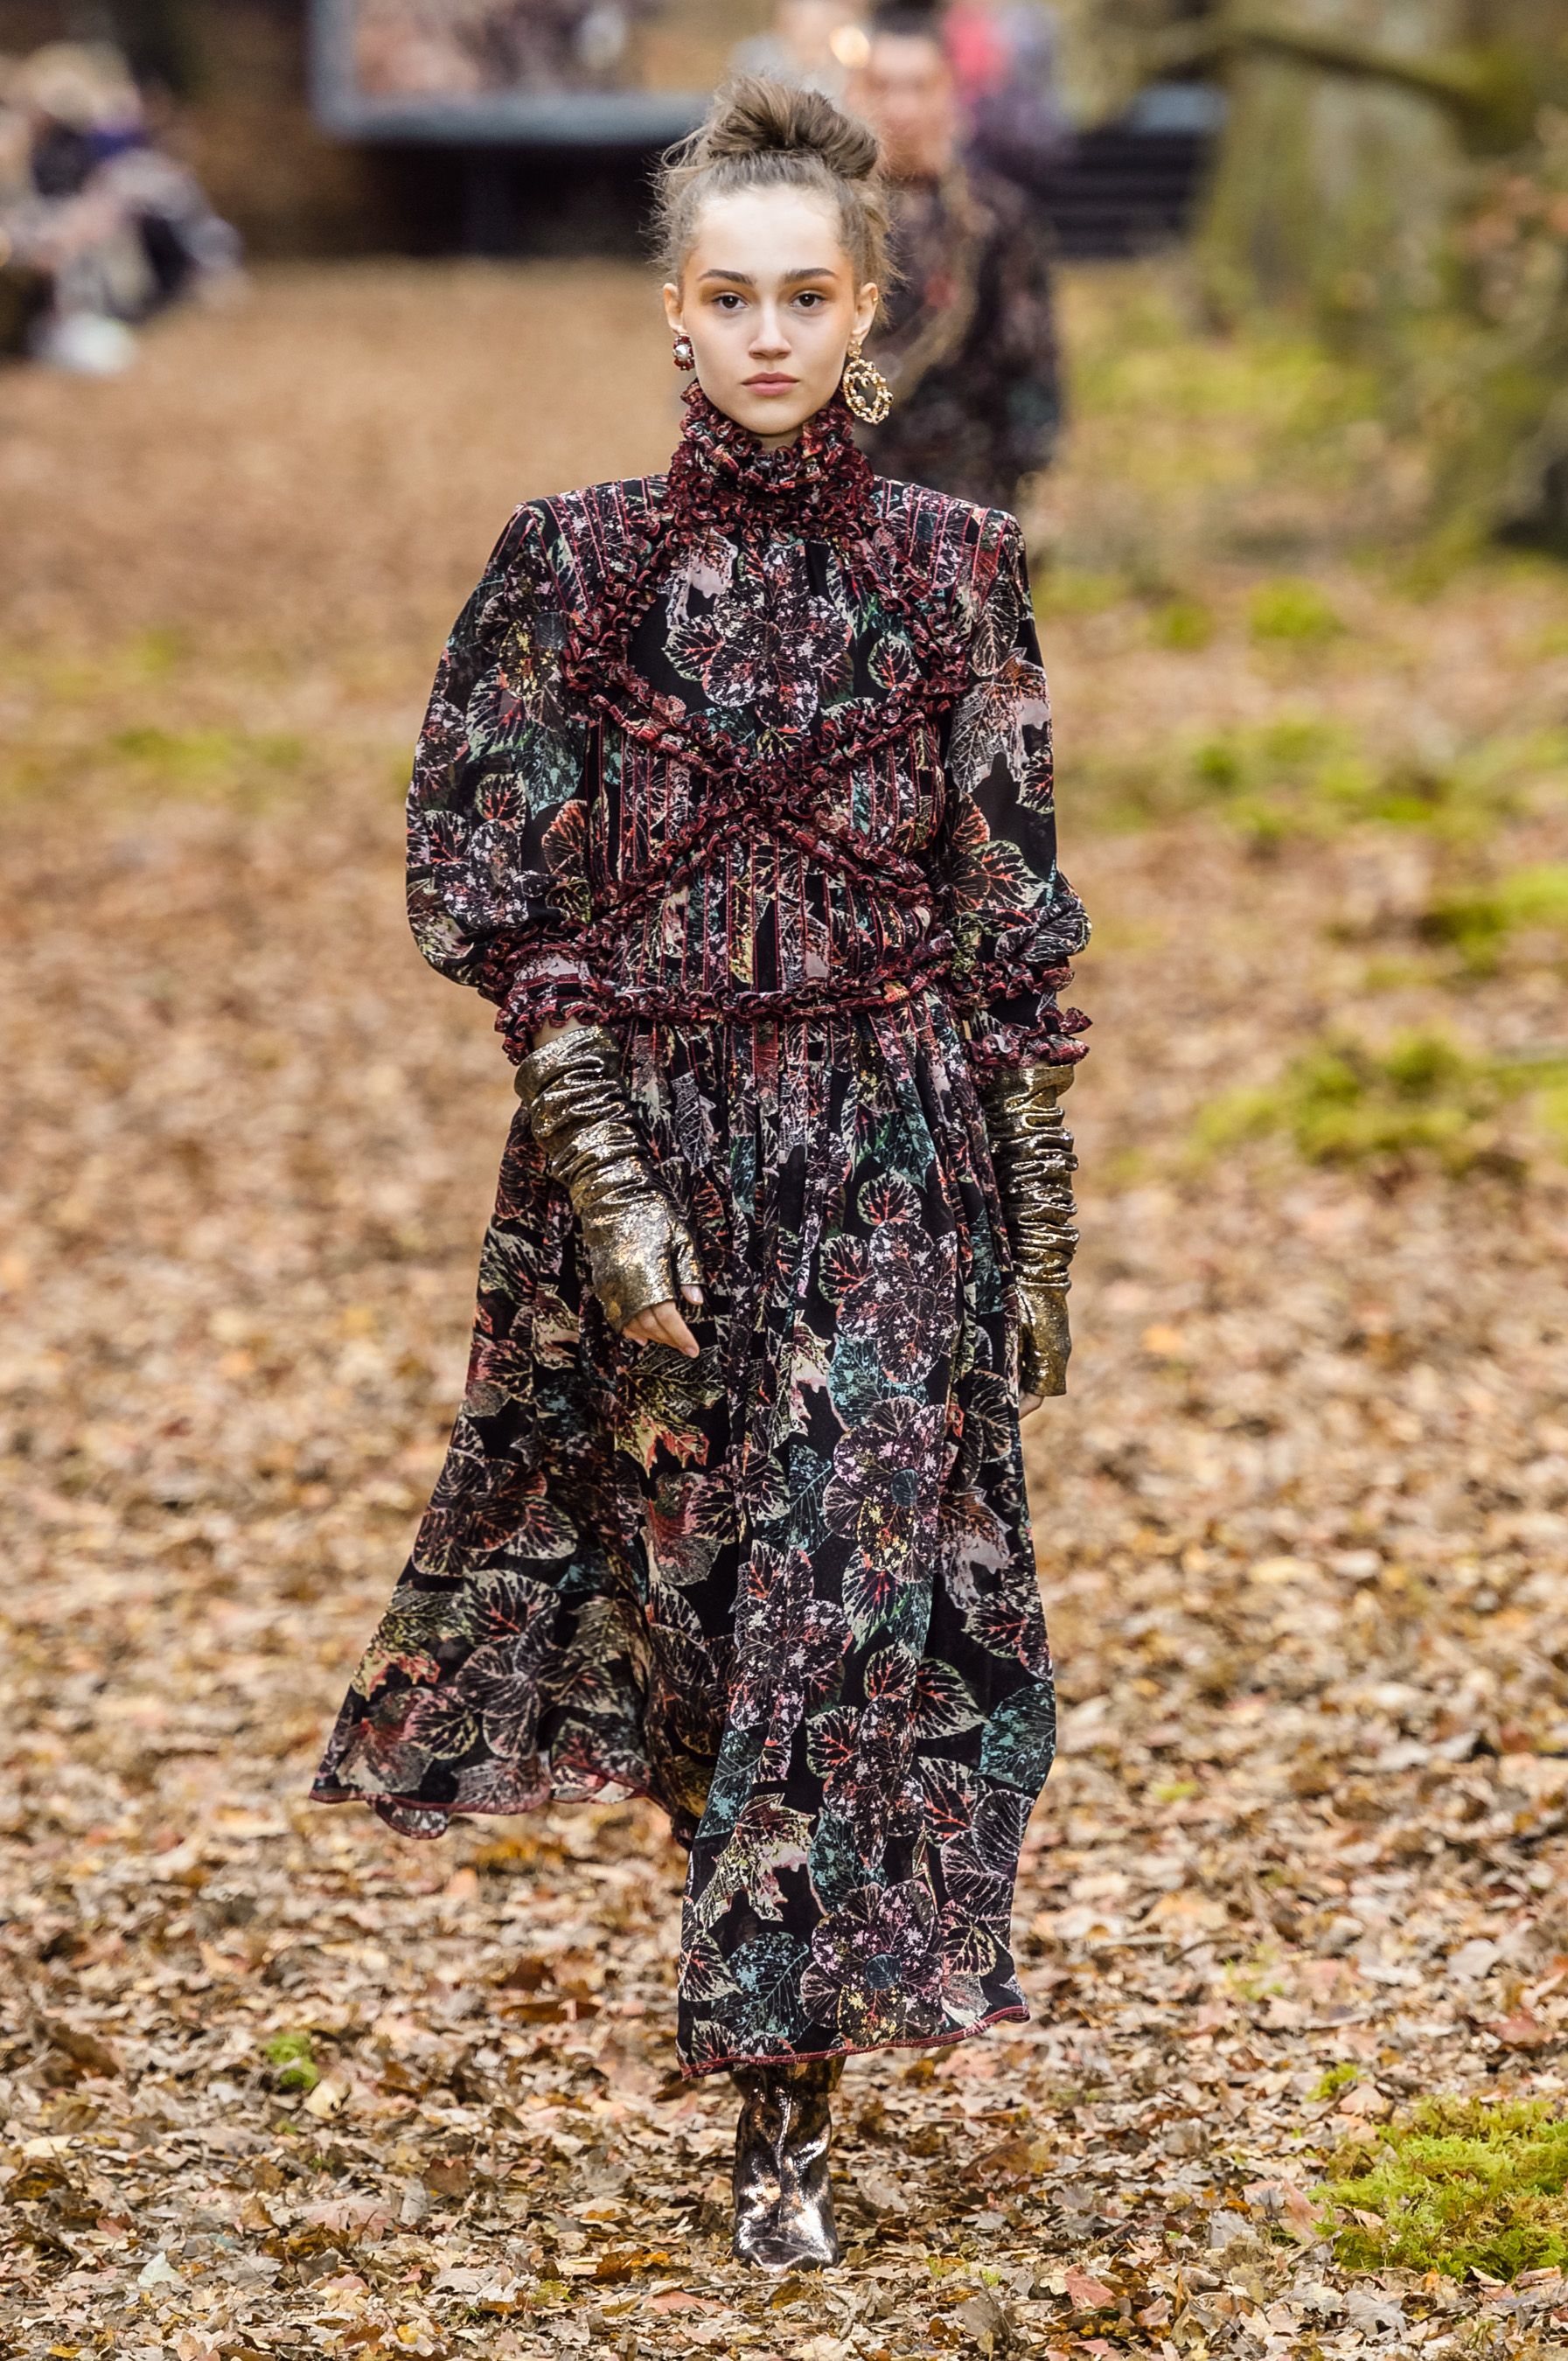 postkontor slå Arving 81 Looks From Chanel Fall 2018 PFW Show – Chanel Runway at Paris Fashion  Week